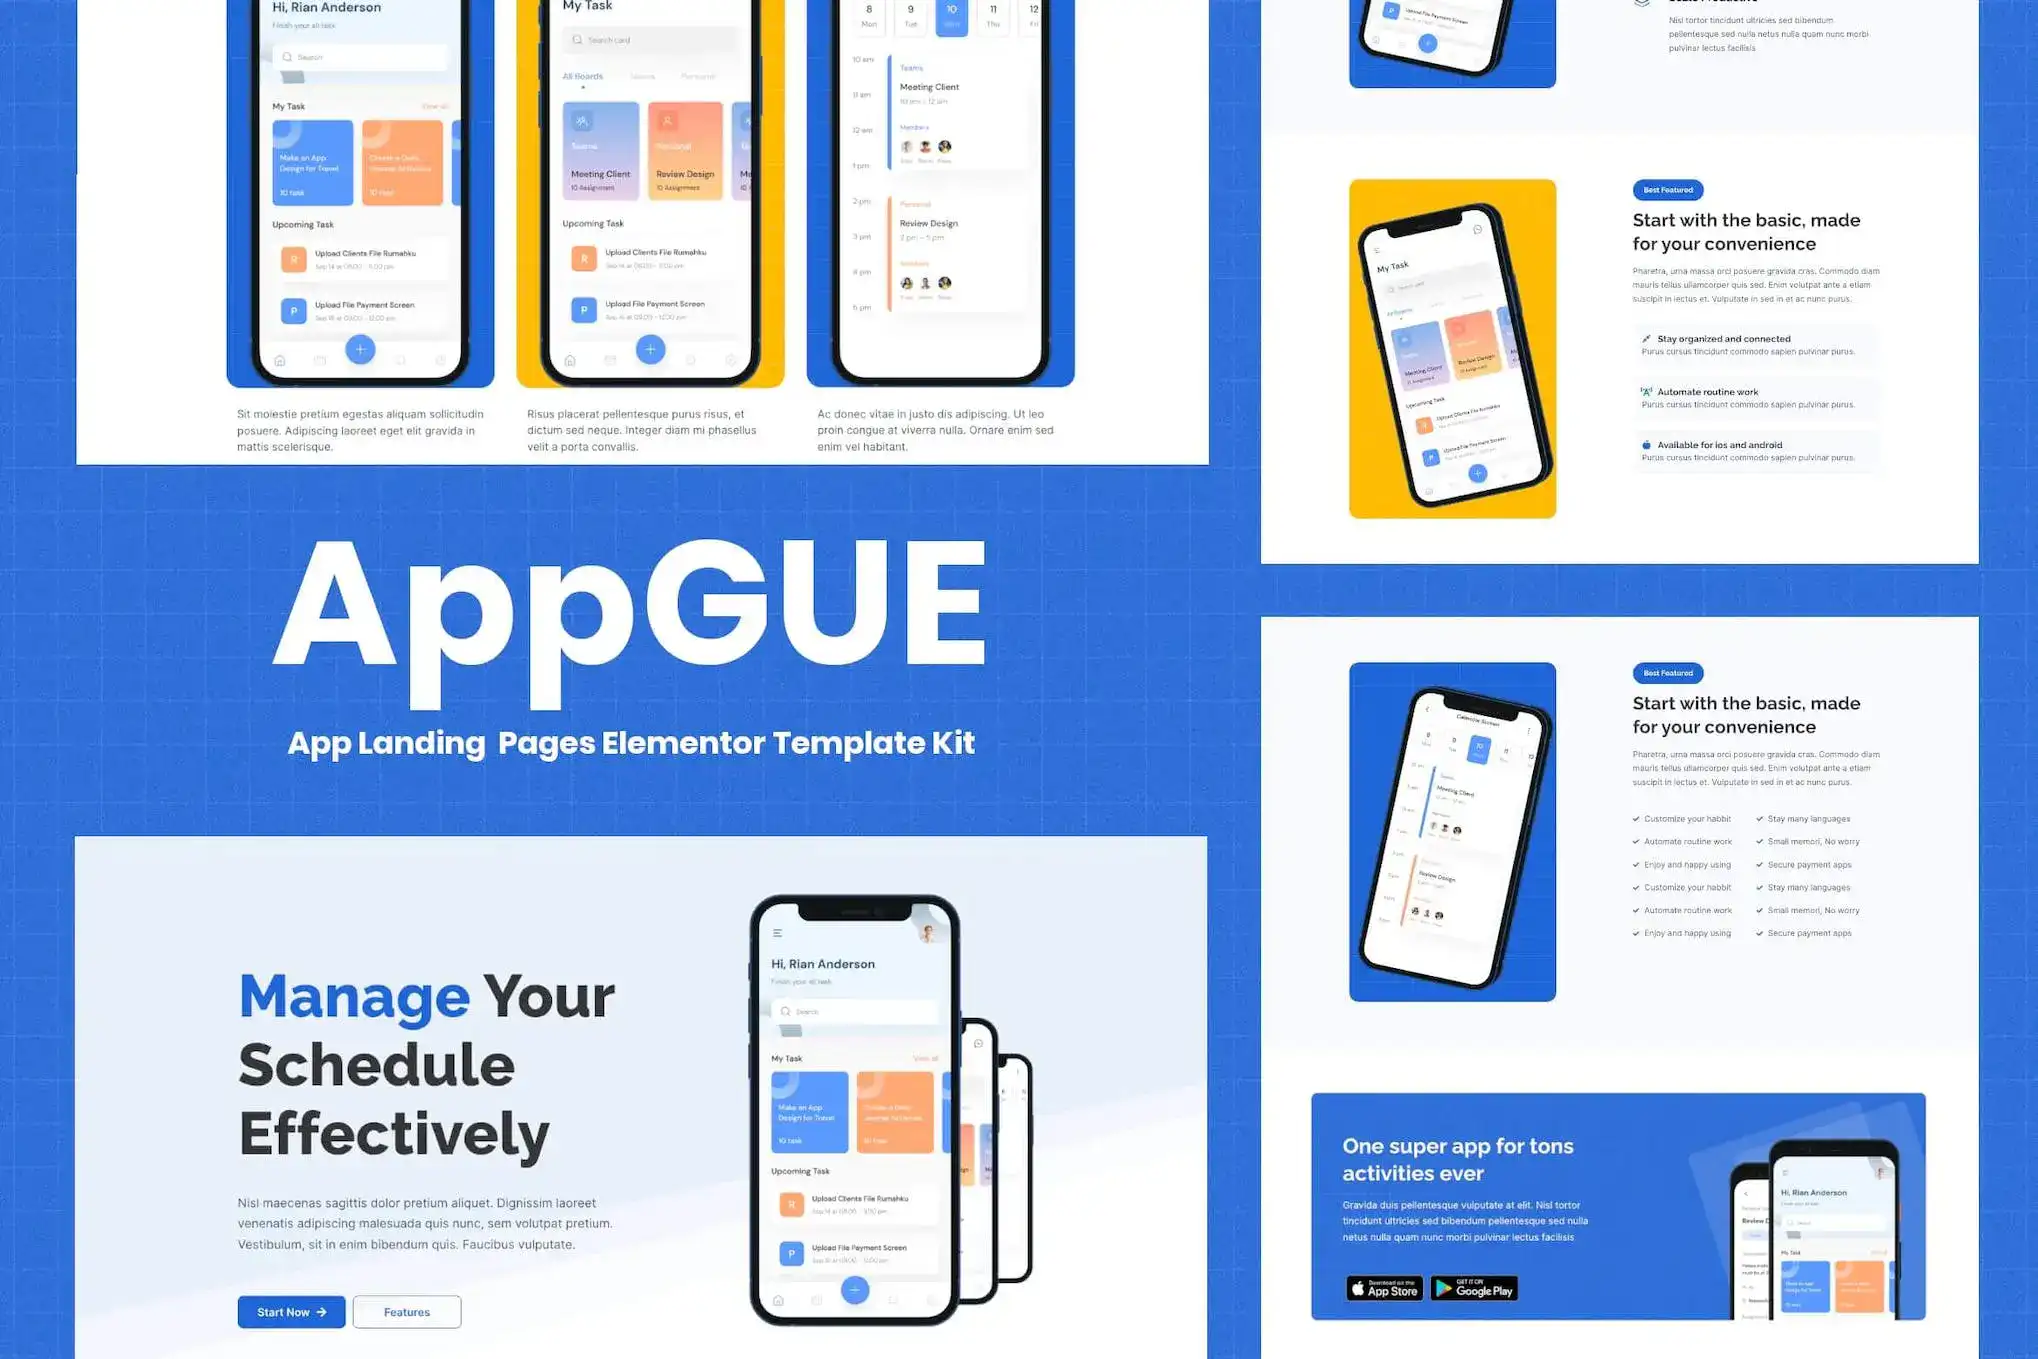 Download the AppGUE application introduction template kit for Elementor